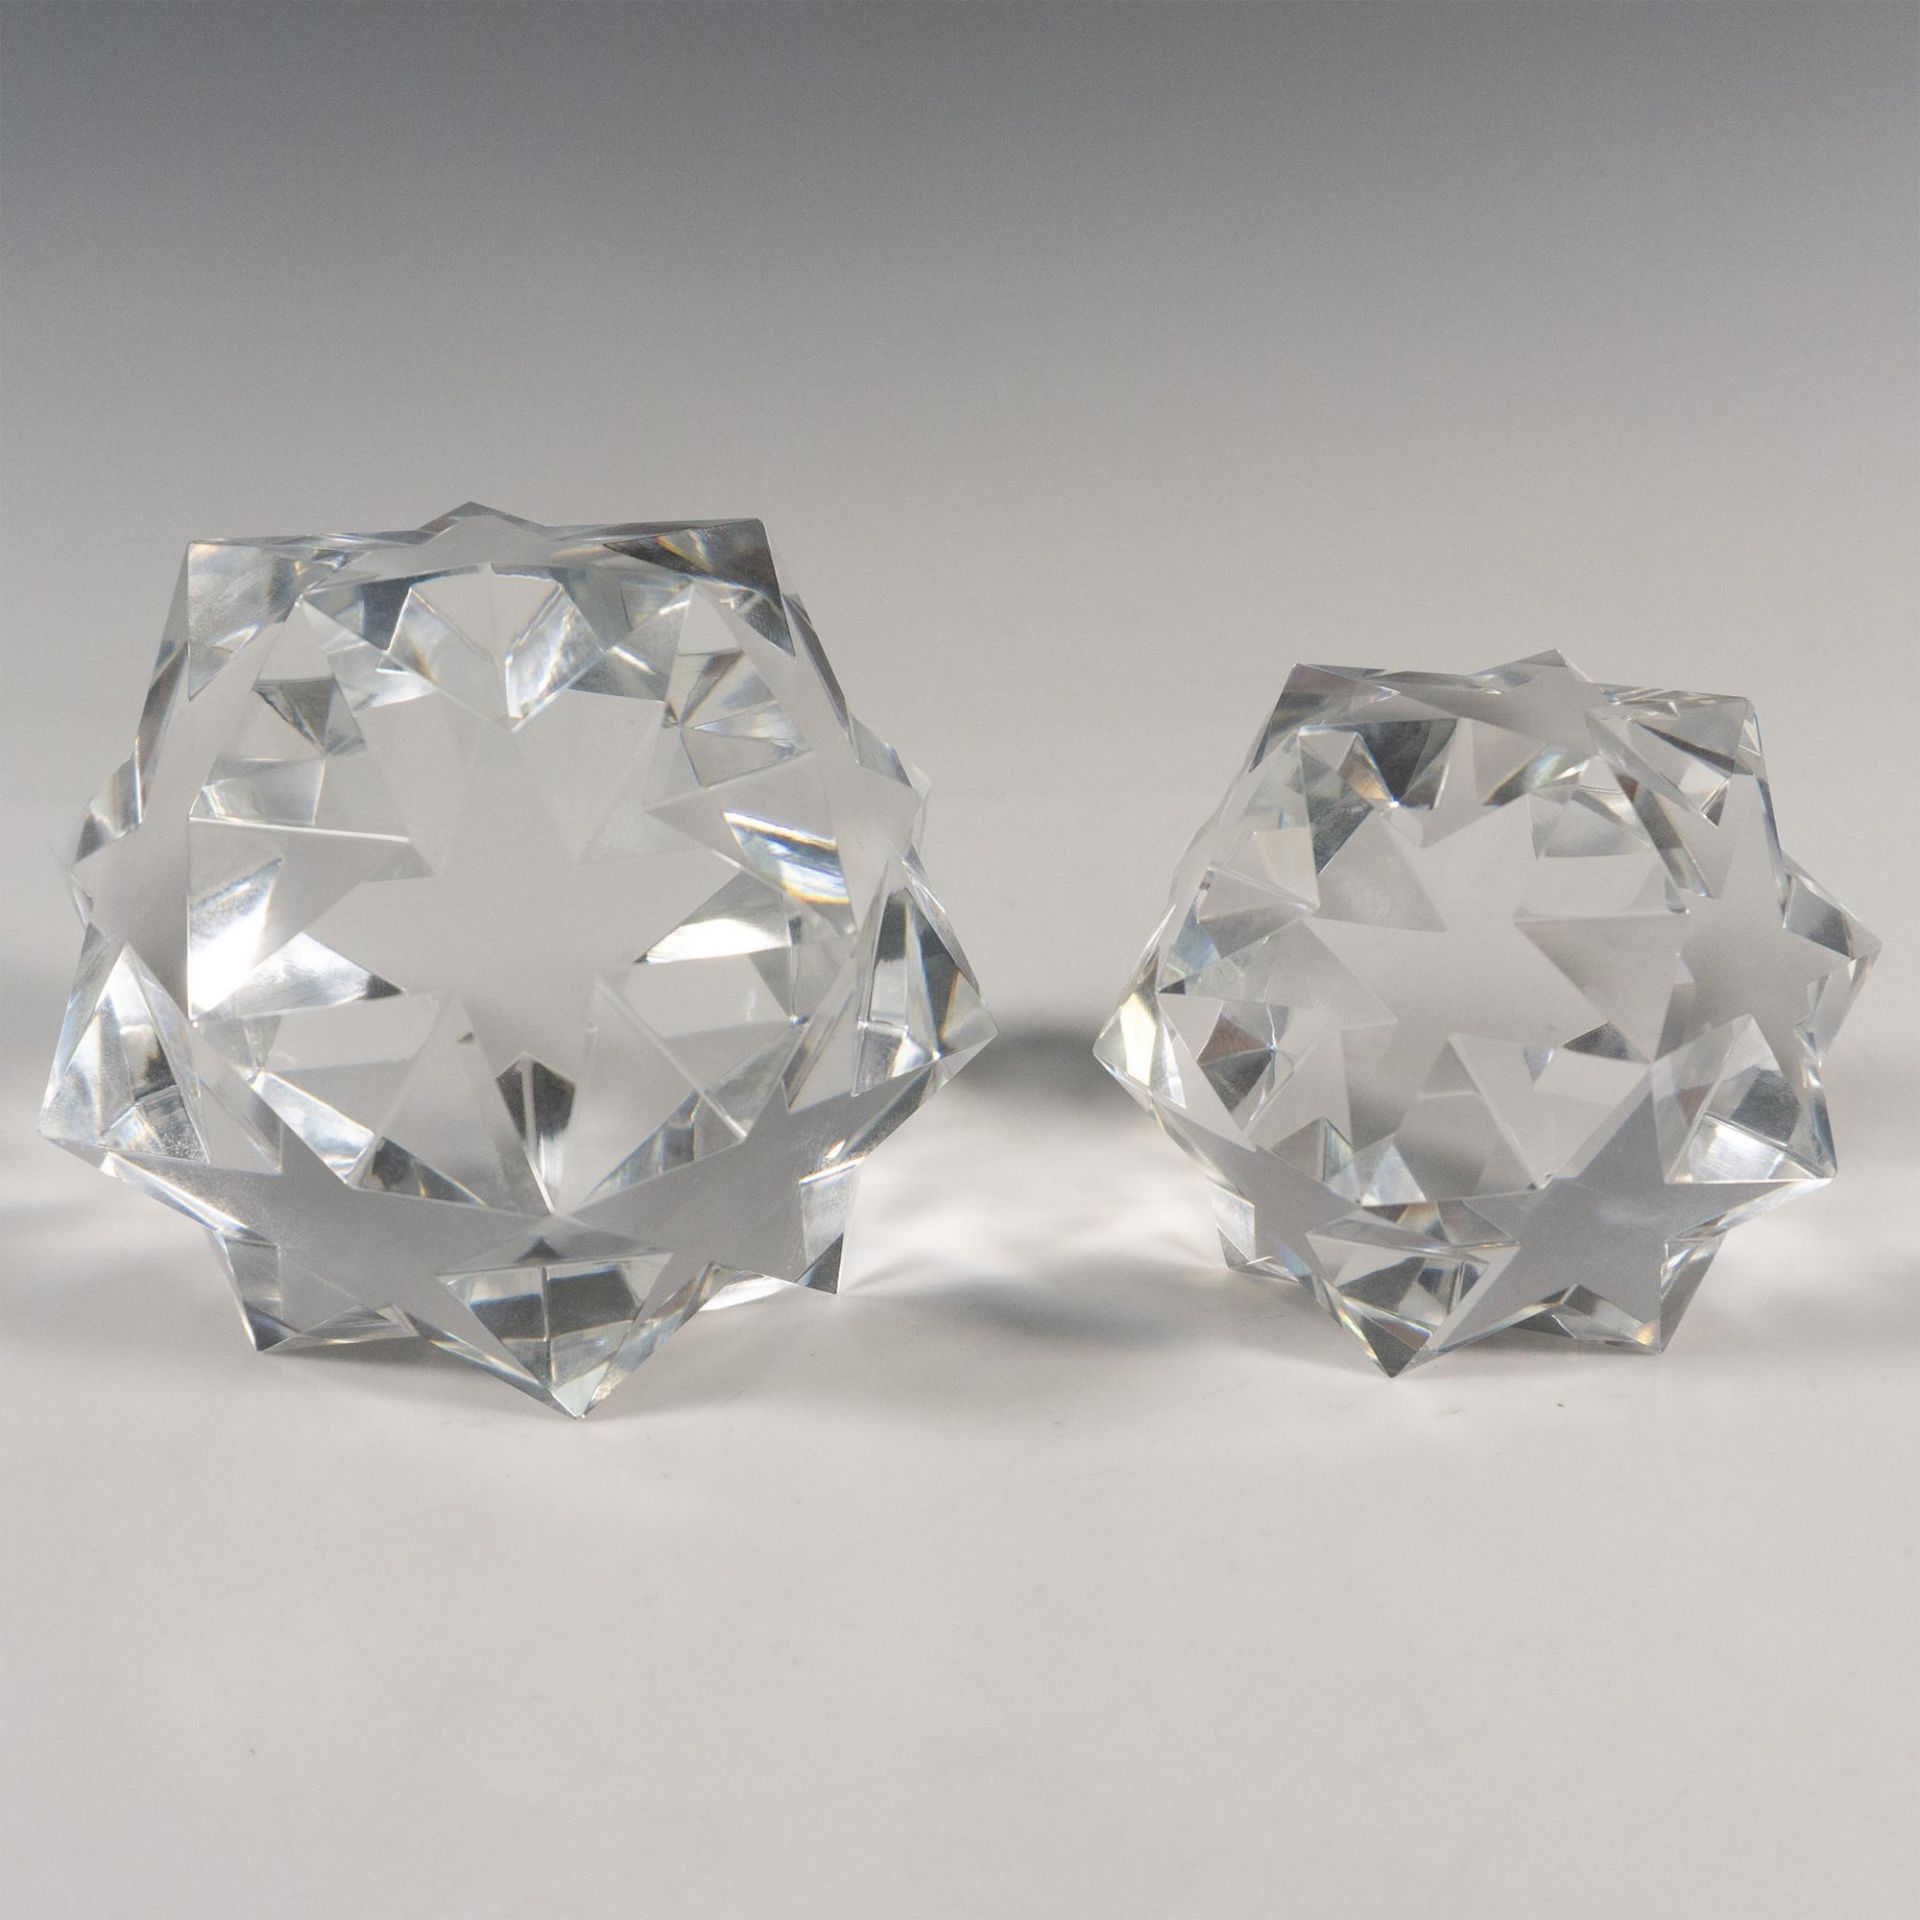 Pair of Star Dodecahedron Paperweights - Bild 3 aus 3